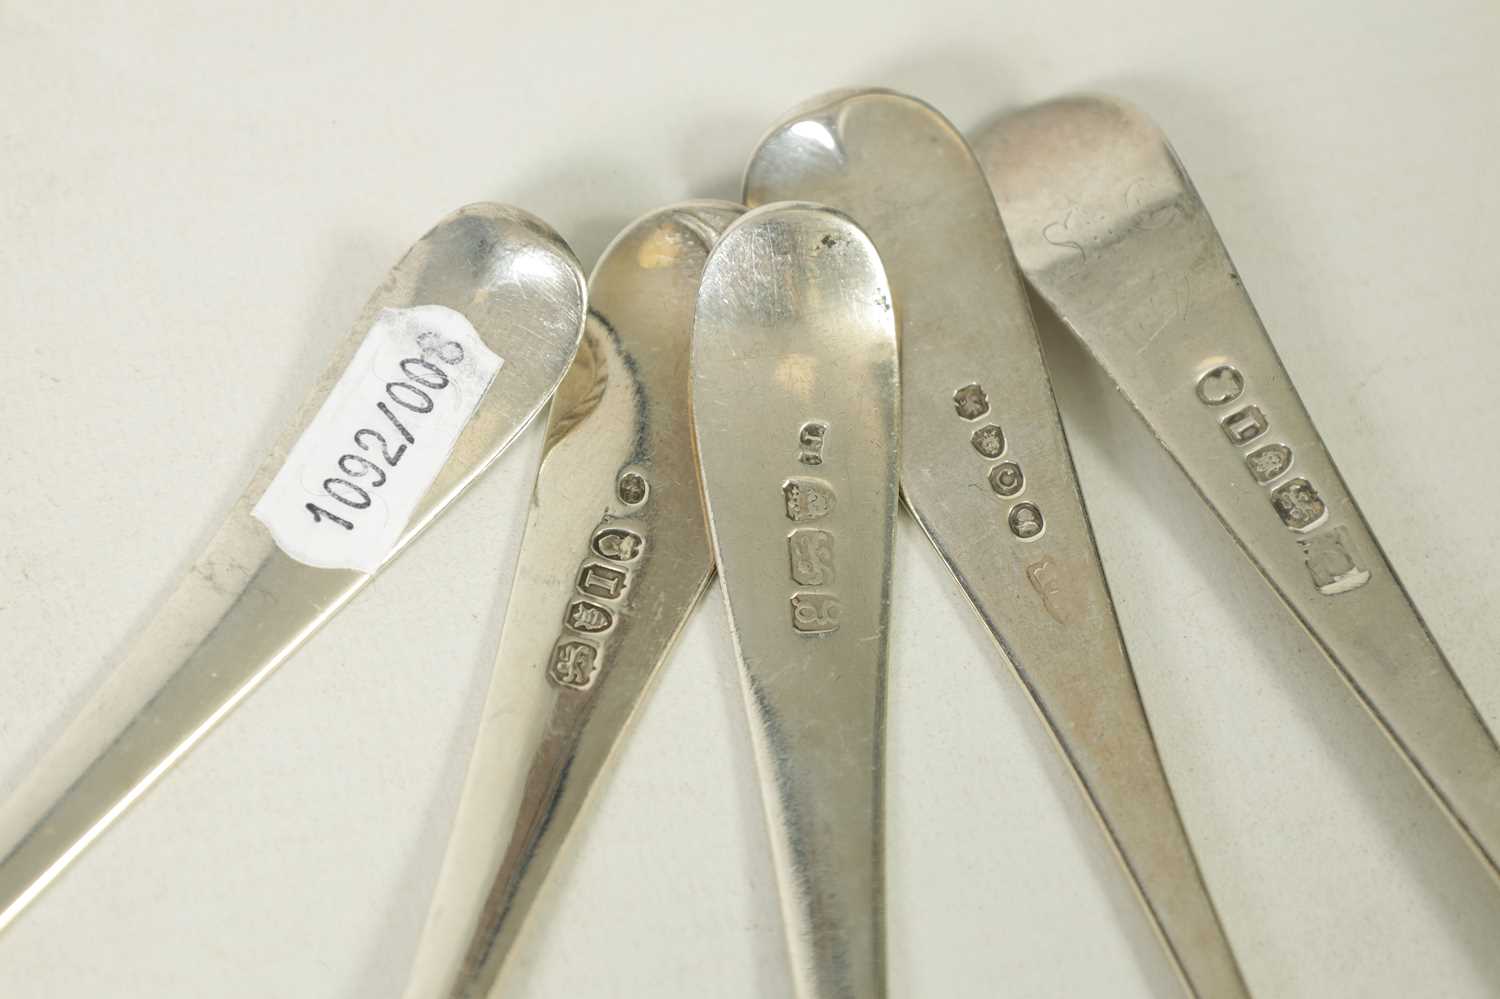 A MATCHED SET OF 11 GEORGE III OLD ENGLISH AND FIDDLE PATTERN SILVER SERVING/SOUP SPOONS - Image 6 of 7